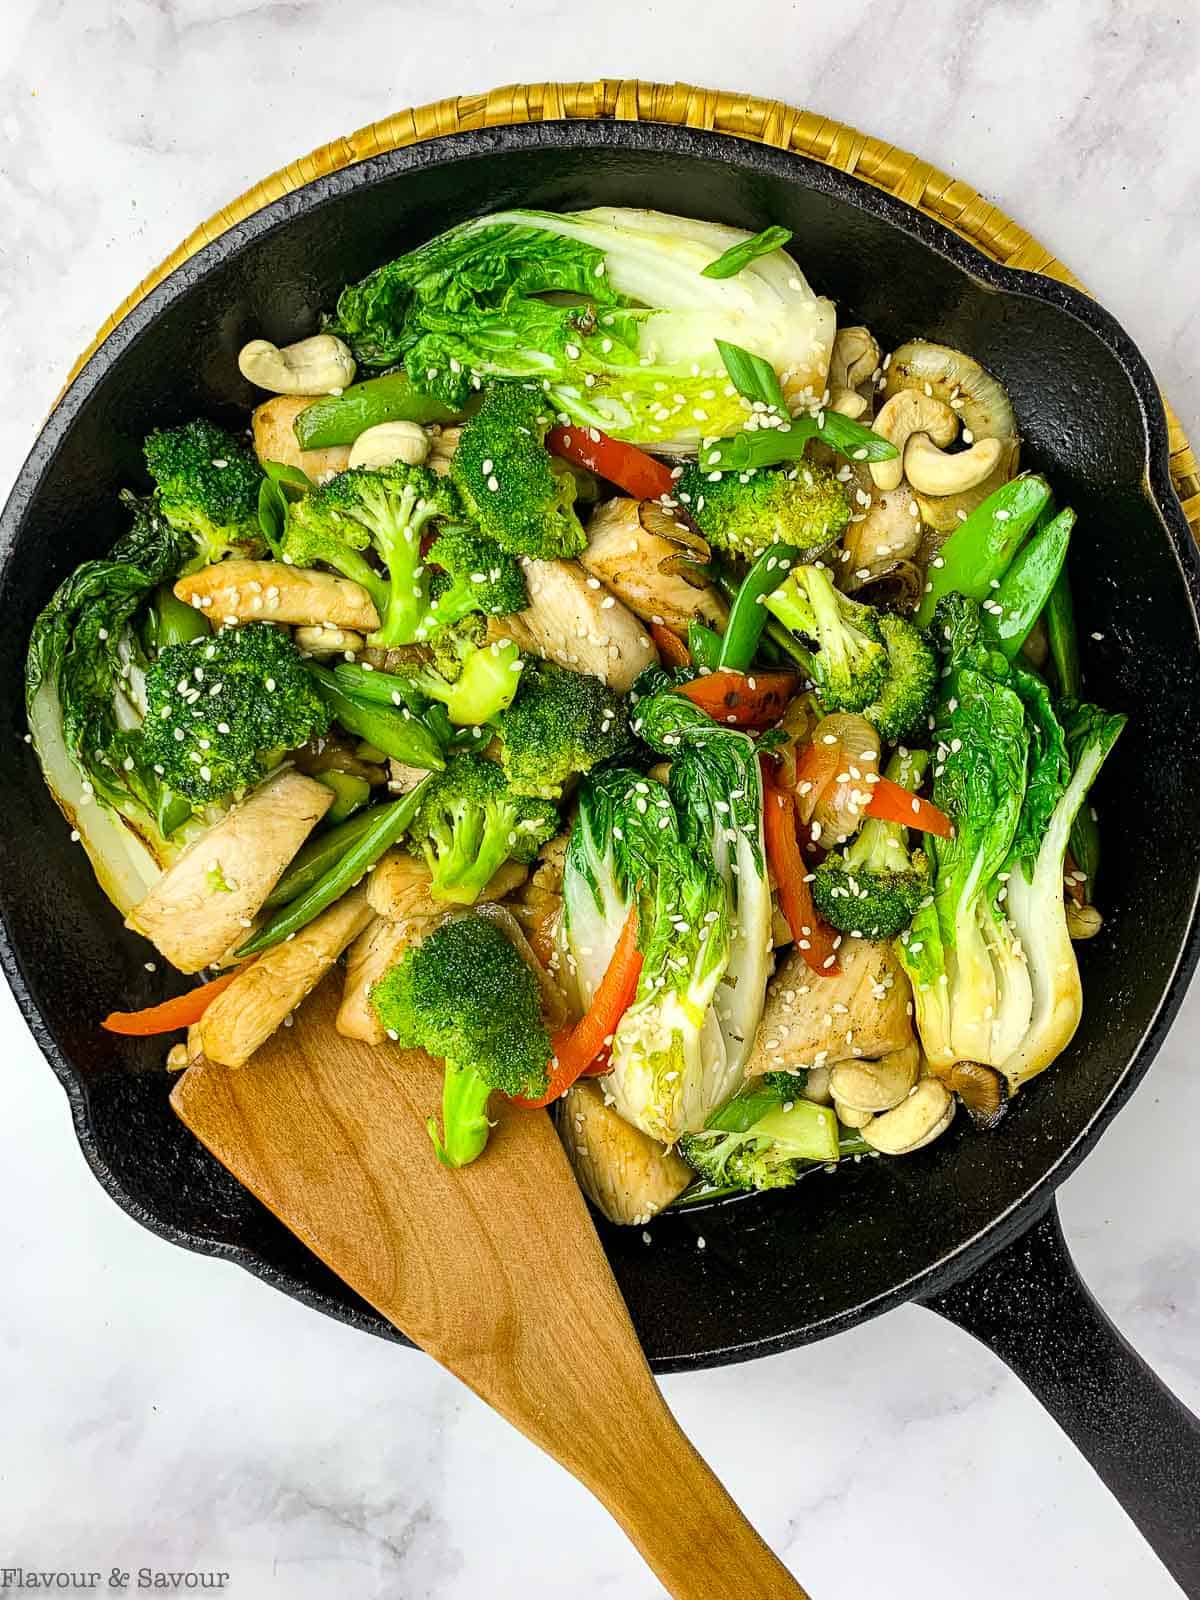 Japanese chicken stir fry in a cast iron skillet with a wooden spatula.